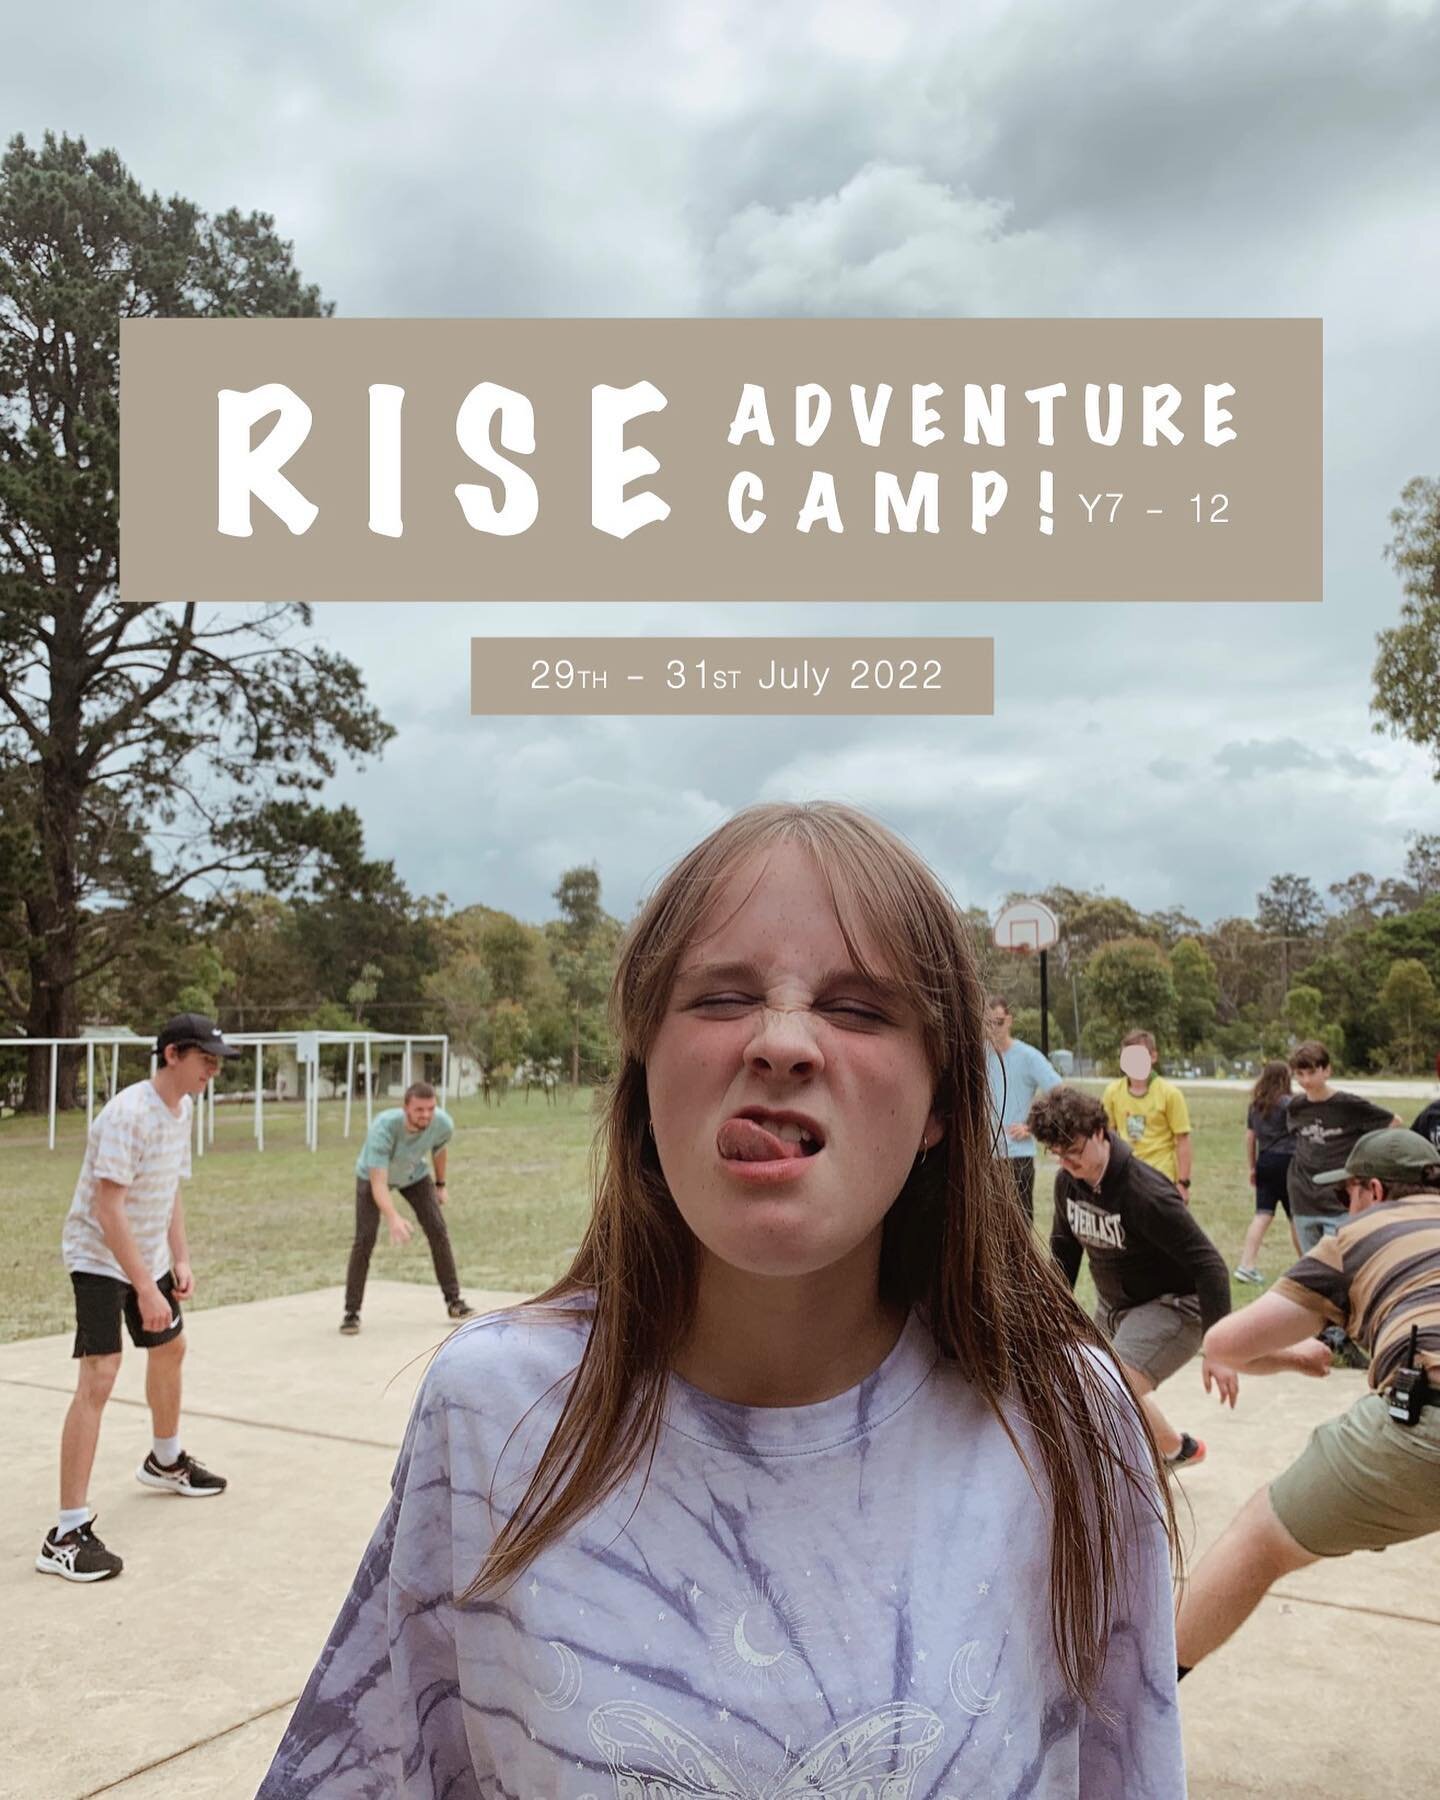 HEY HIGH SCHOOLERS!
RISE Adventure Camp is only 2 weeks away! Make sure you enrol &amp; bring your friends 😋

Contact us! 

📧 office@wedderburn.org.au
📞 46341265

#rise #adventure #camp #sydney #australia